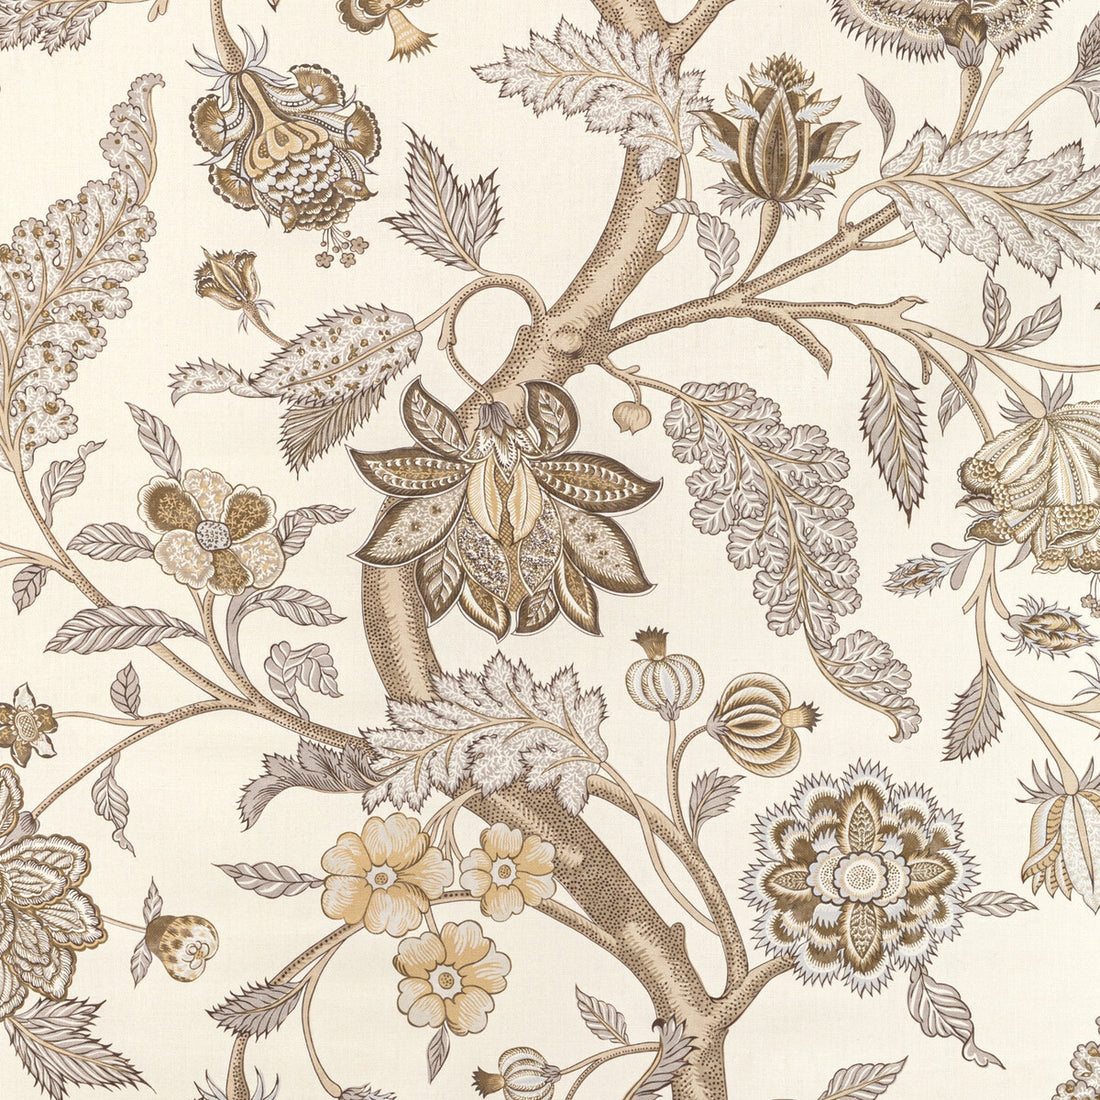 Palampore Print fabric in stone color - pattern 2022109.1611.0 - by Lee Jofa in the Sarah Bartholomew collection